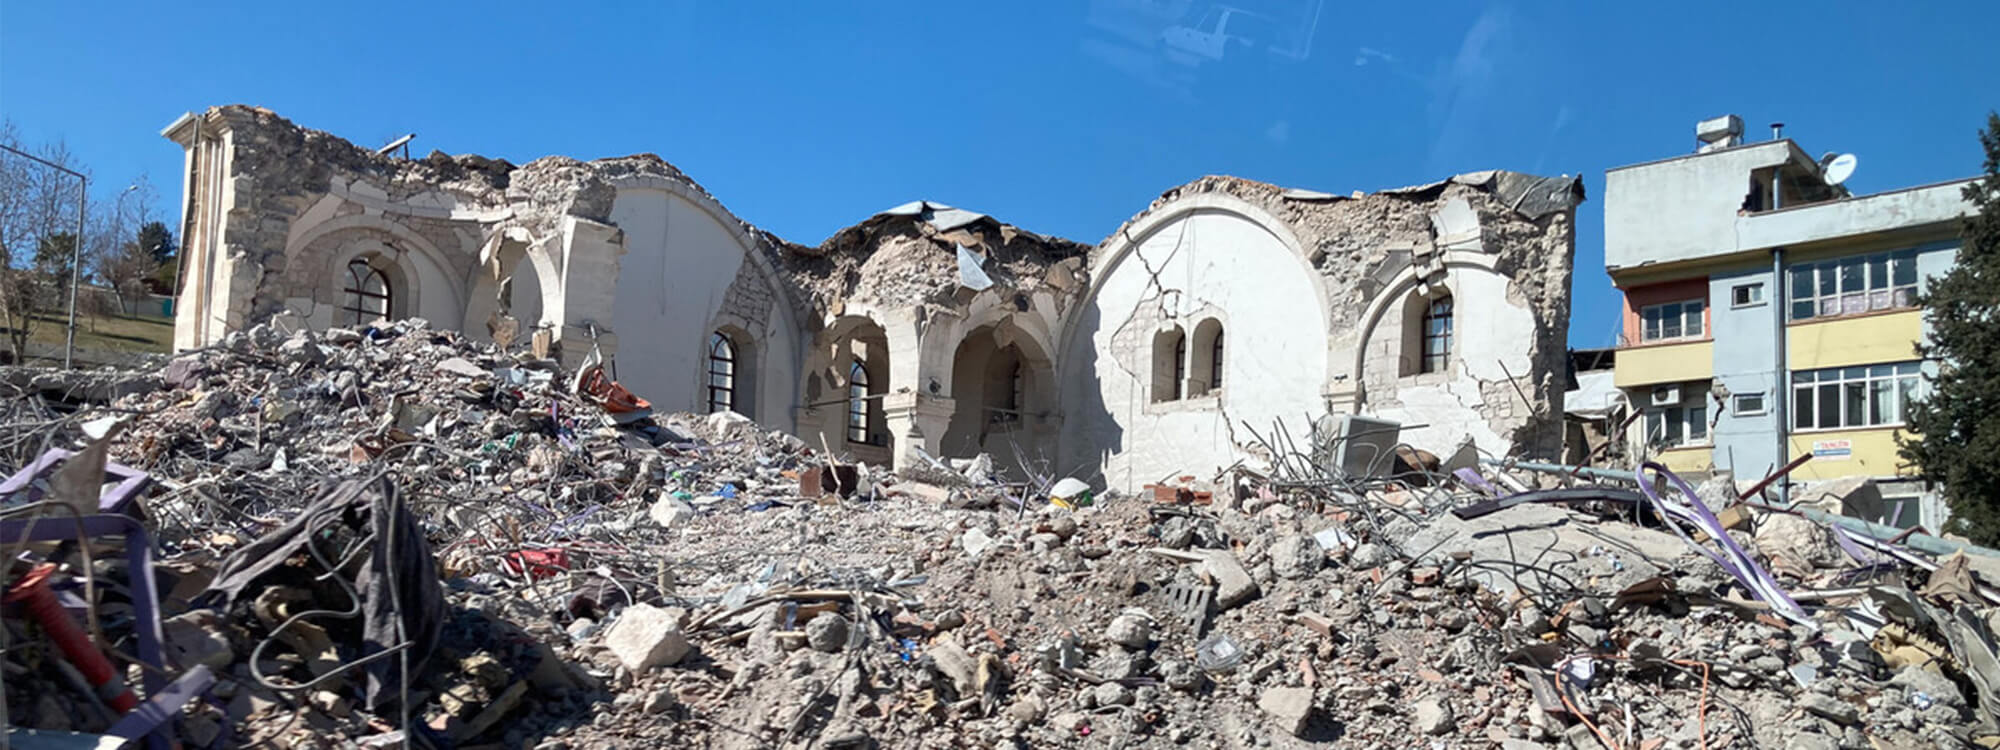 Buildings badly damaged by an earthquake, with rubble around